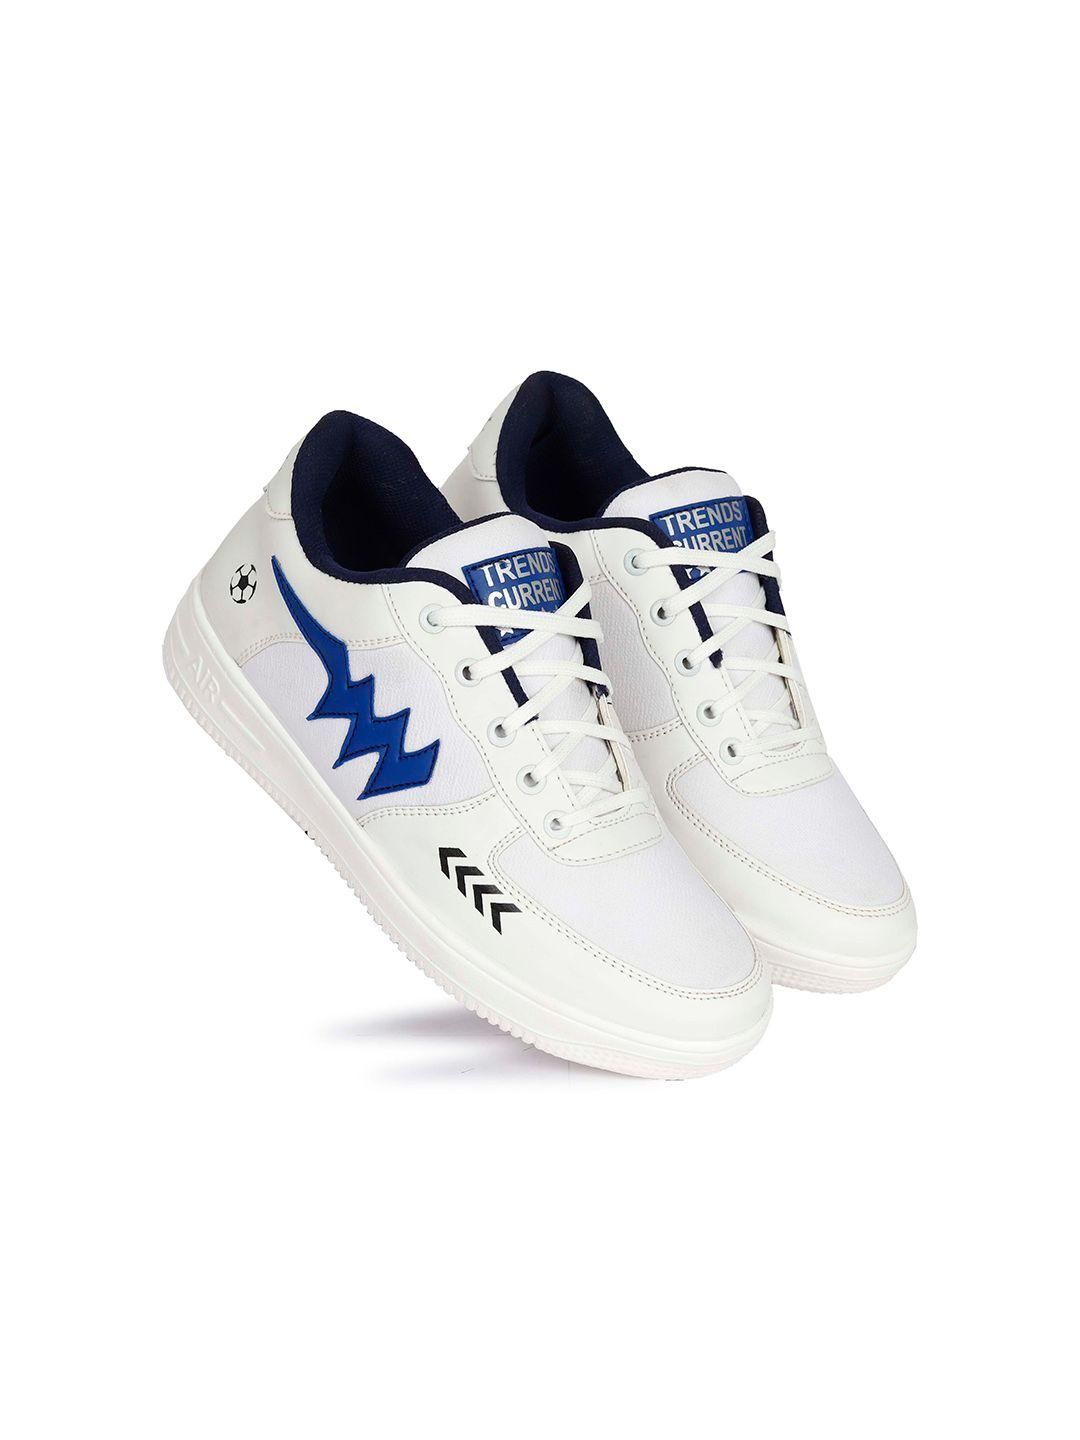 Aadi Men's Synthetic Leather Blue & White Casual Shoes